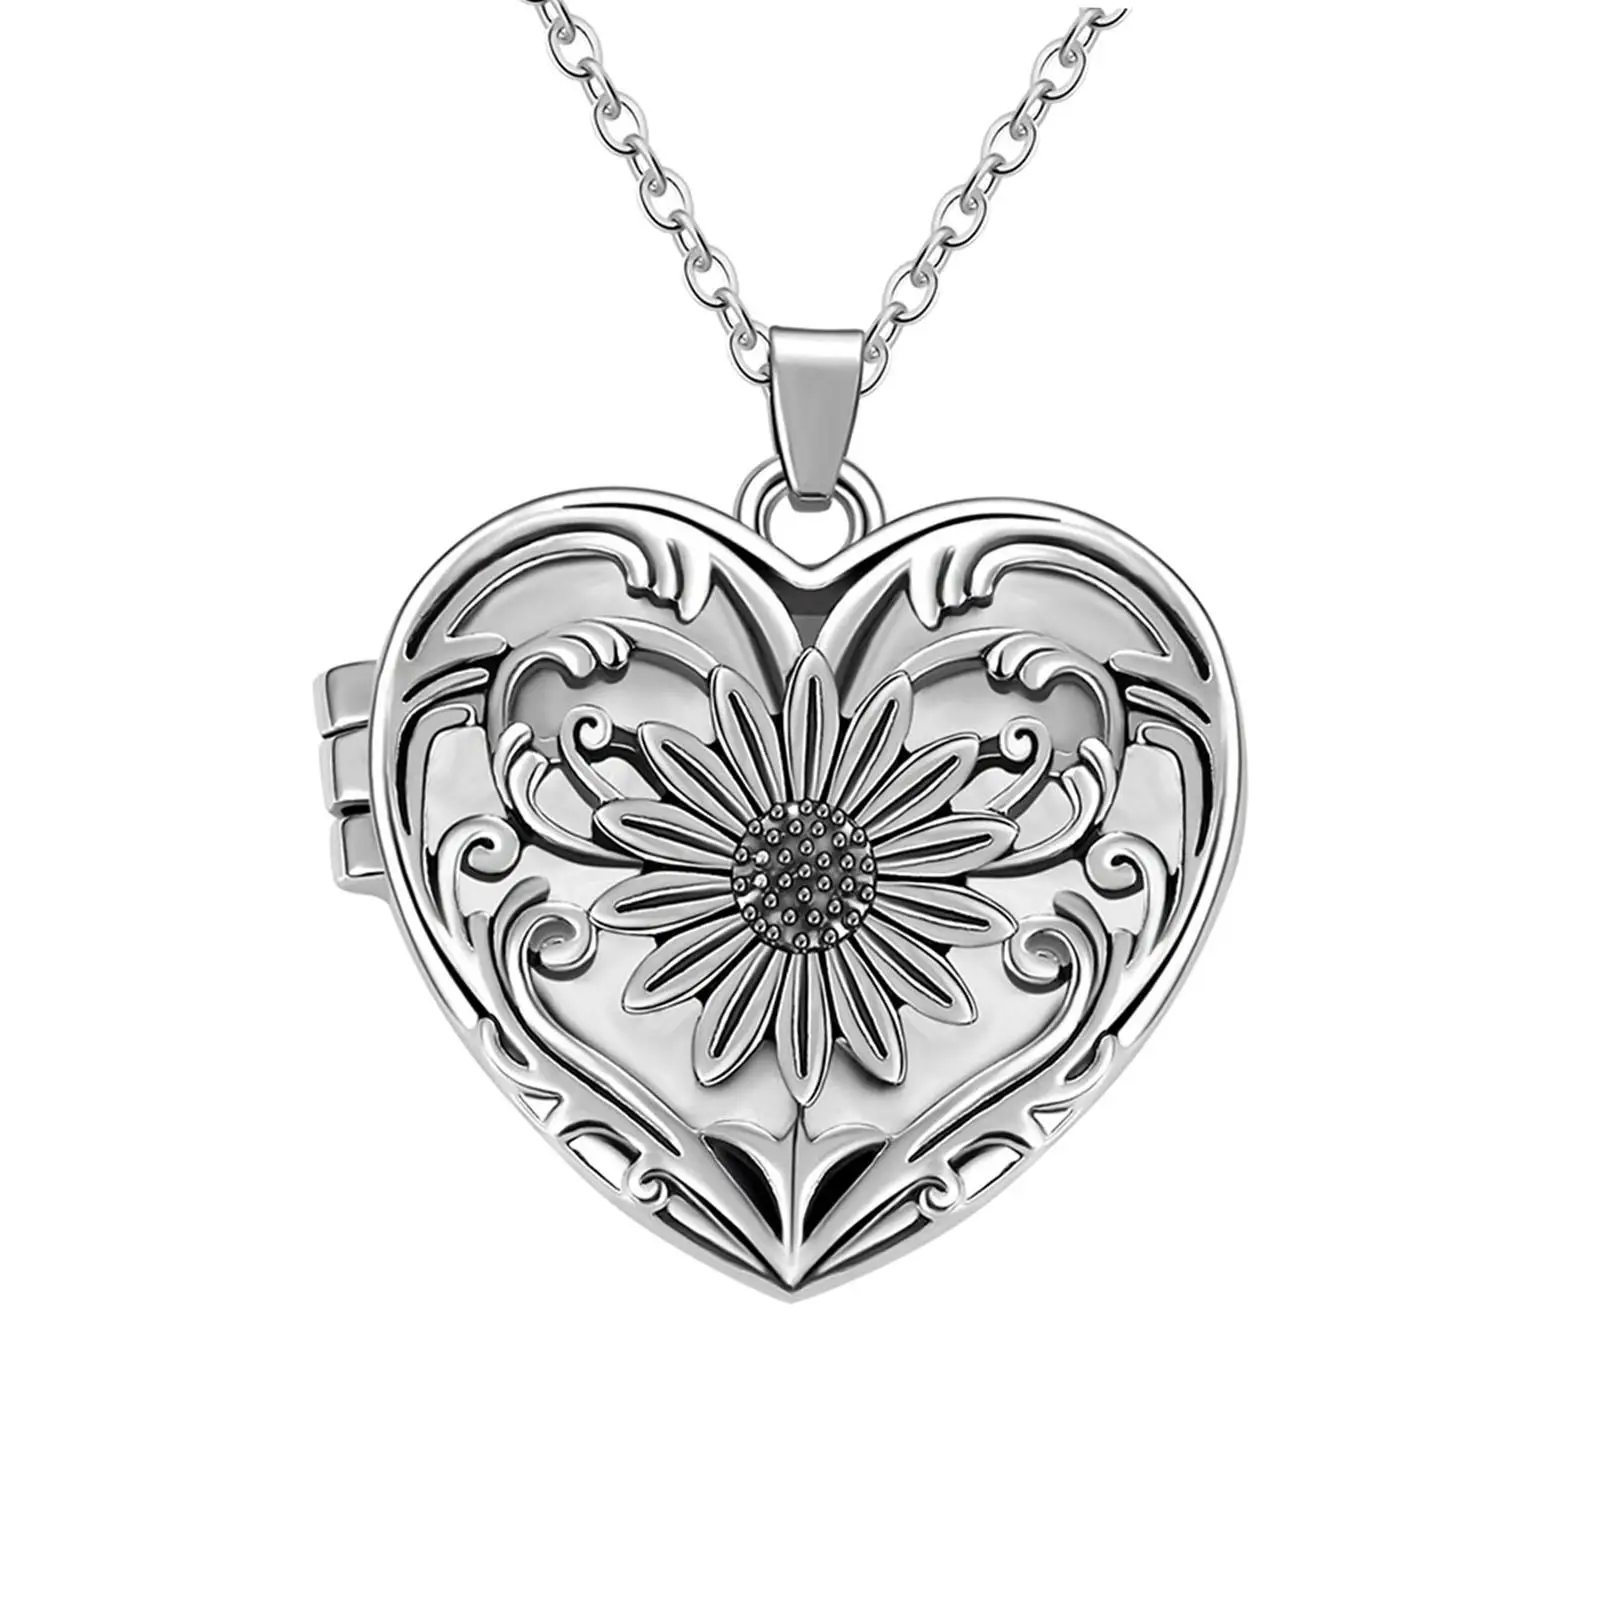 Urn Necklace for Ashes Exquisite Line Chain Necklace Bereavement Gift Cremation Heart Urn Keepsake Locket for Friends Mom Dad